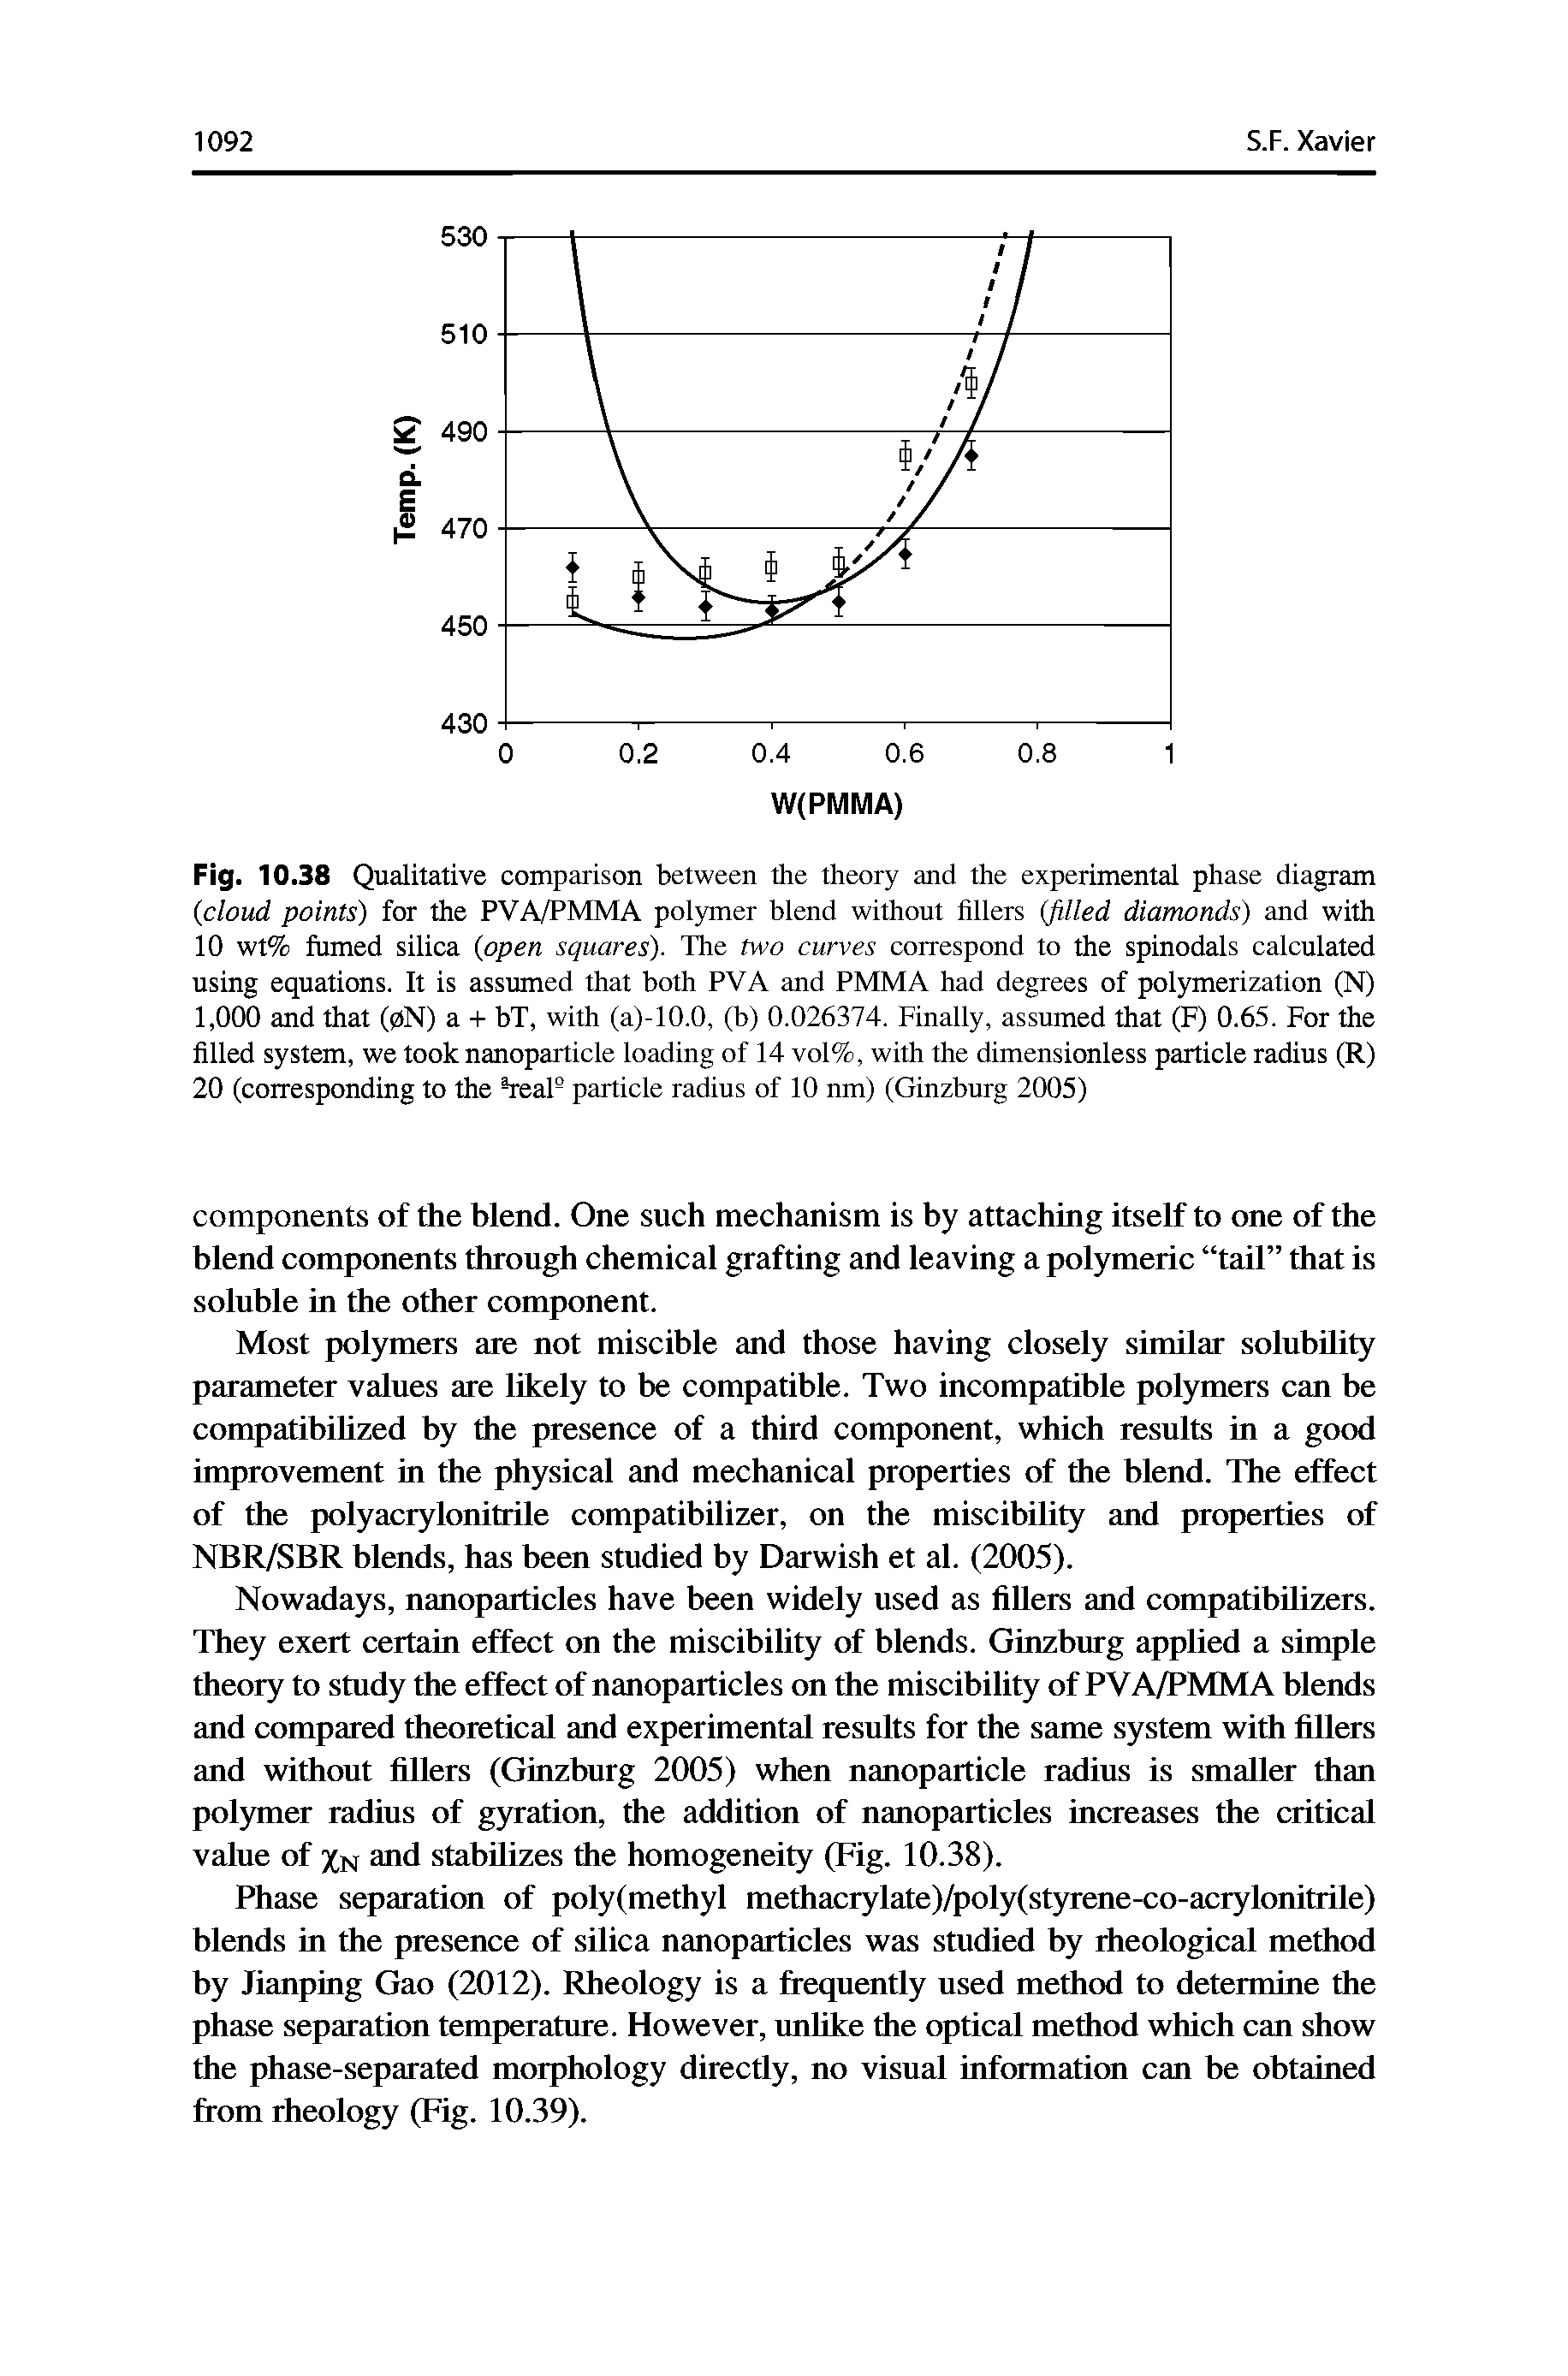 Fig. 10.38 Qualitative comparison between the theory and the experimental phase diagram (cloud points) for the PVA/PMMA polymer blend without fillers (filled diamonds) and with 10 wt% fumed silica (open squares). The two curves correspond to the spinodals calculated using equations. It is assumed that both PVA and PMMA had degrees of polymerization (N) 1,000 and that (pN) a + bT, with (a)-lO.O, (b) 0.026374. Finally, assumed that (F) 0.65. For the filled system, we took nanoparticle loading of 14 vol%, with the dimensionless particle radius (R) 20 (corresponding to the real- particle radius of 10 run) (Ginzburg 2005)...